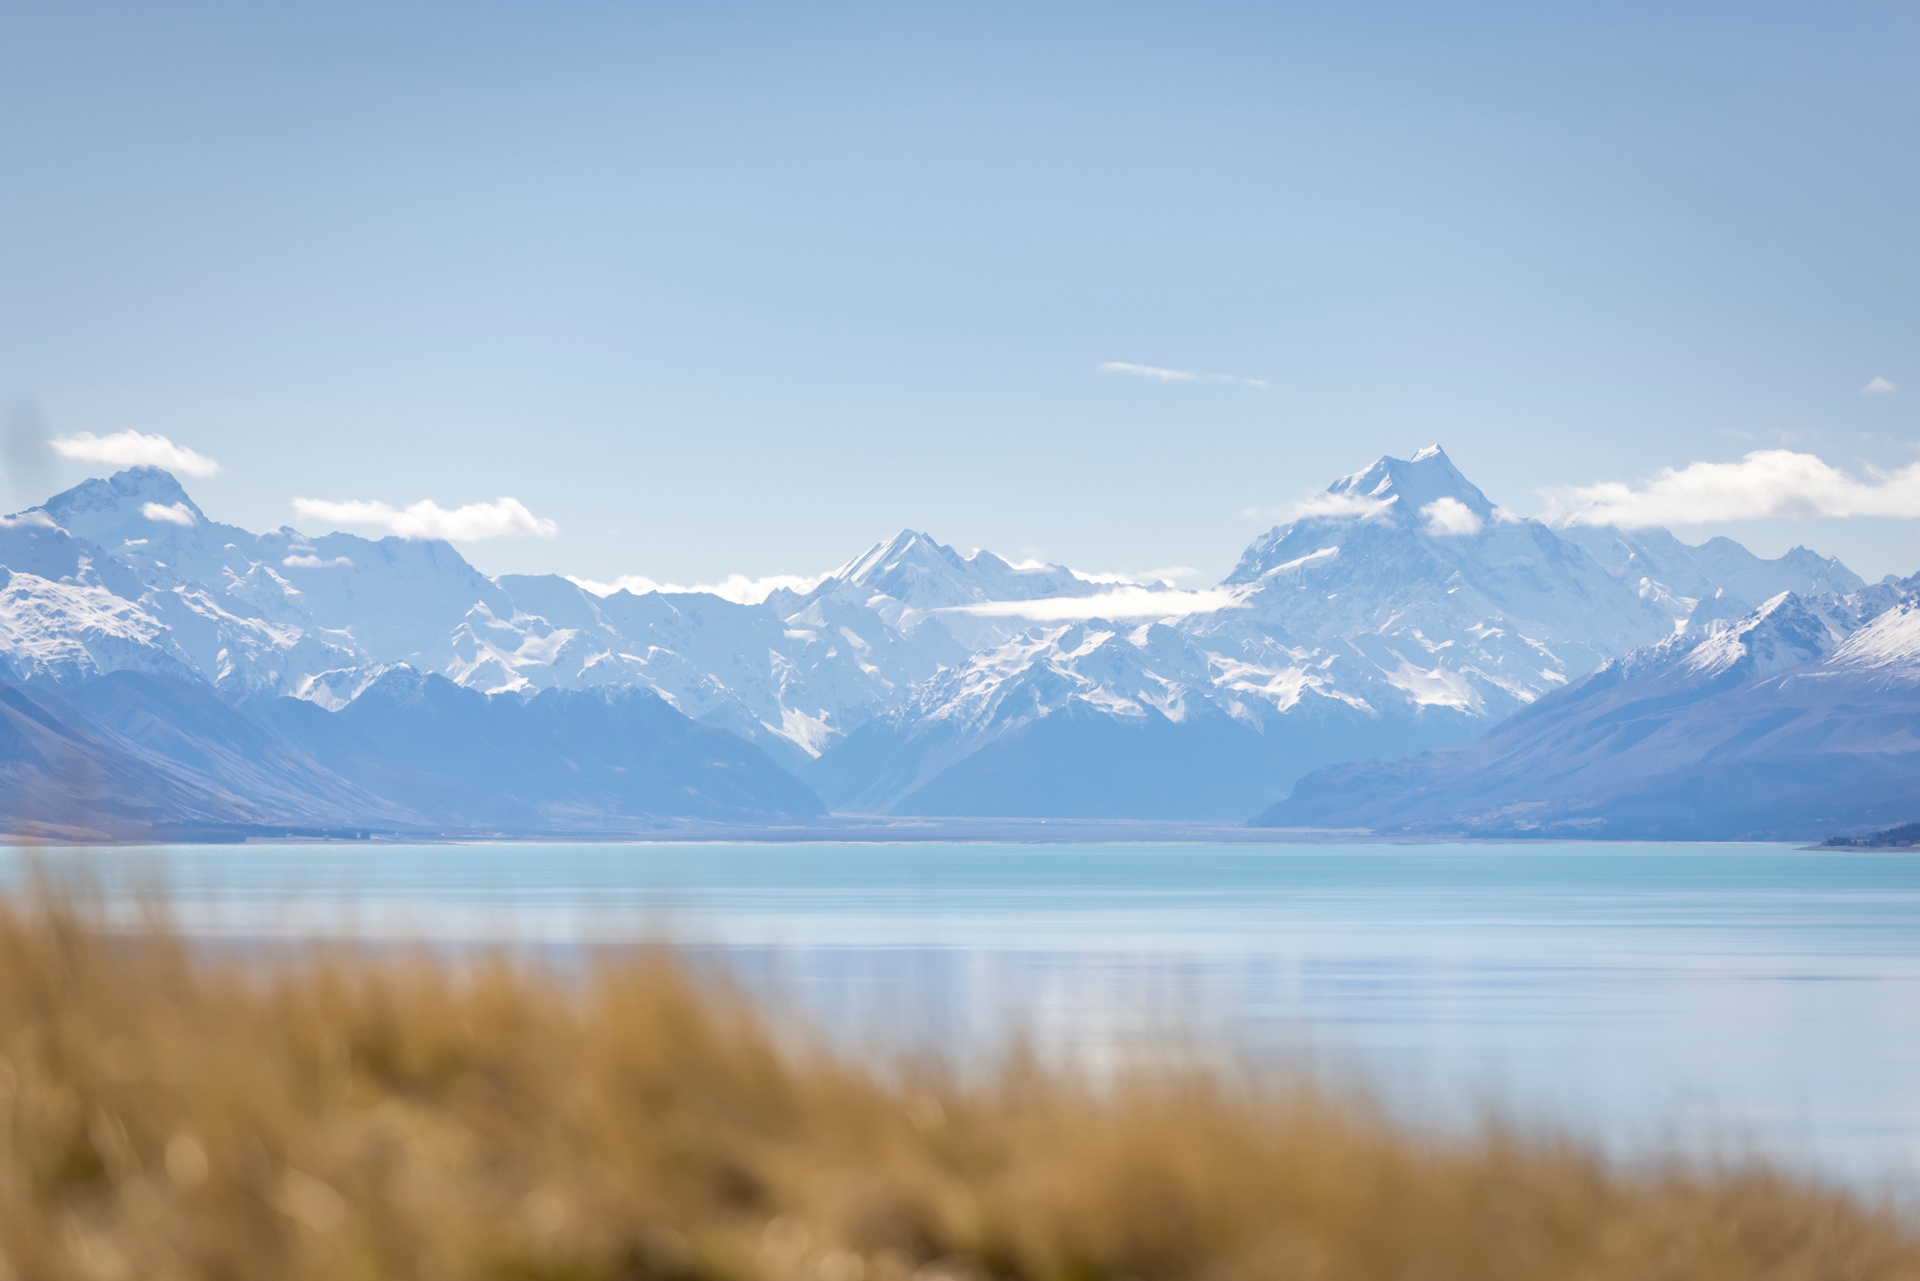 Looking over Lake Pukaki towards Aoraki Mt Cook and the Southern Alps. Image courtesy Miles Holden.